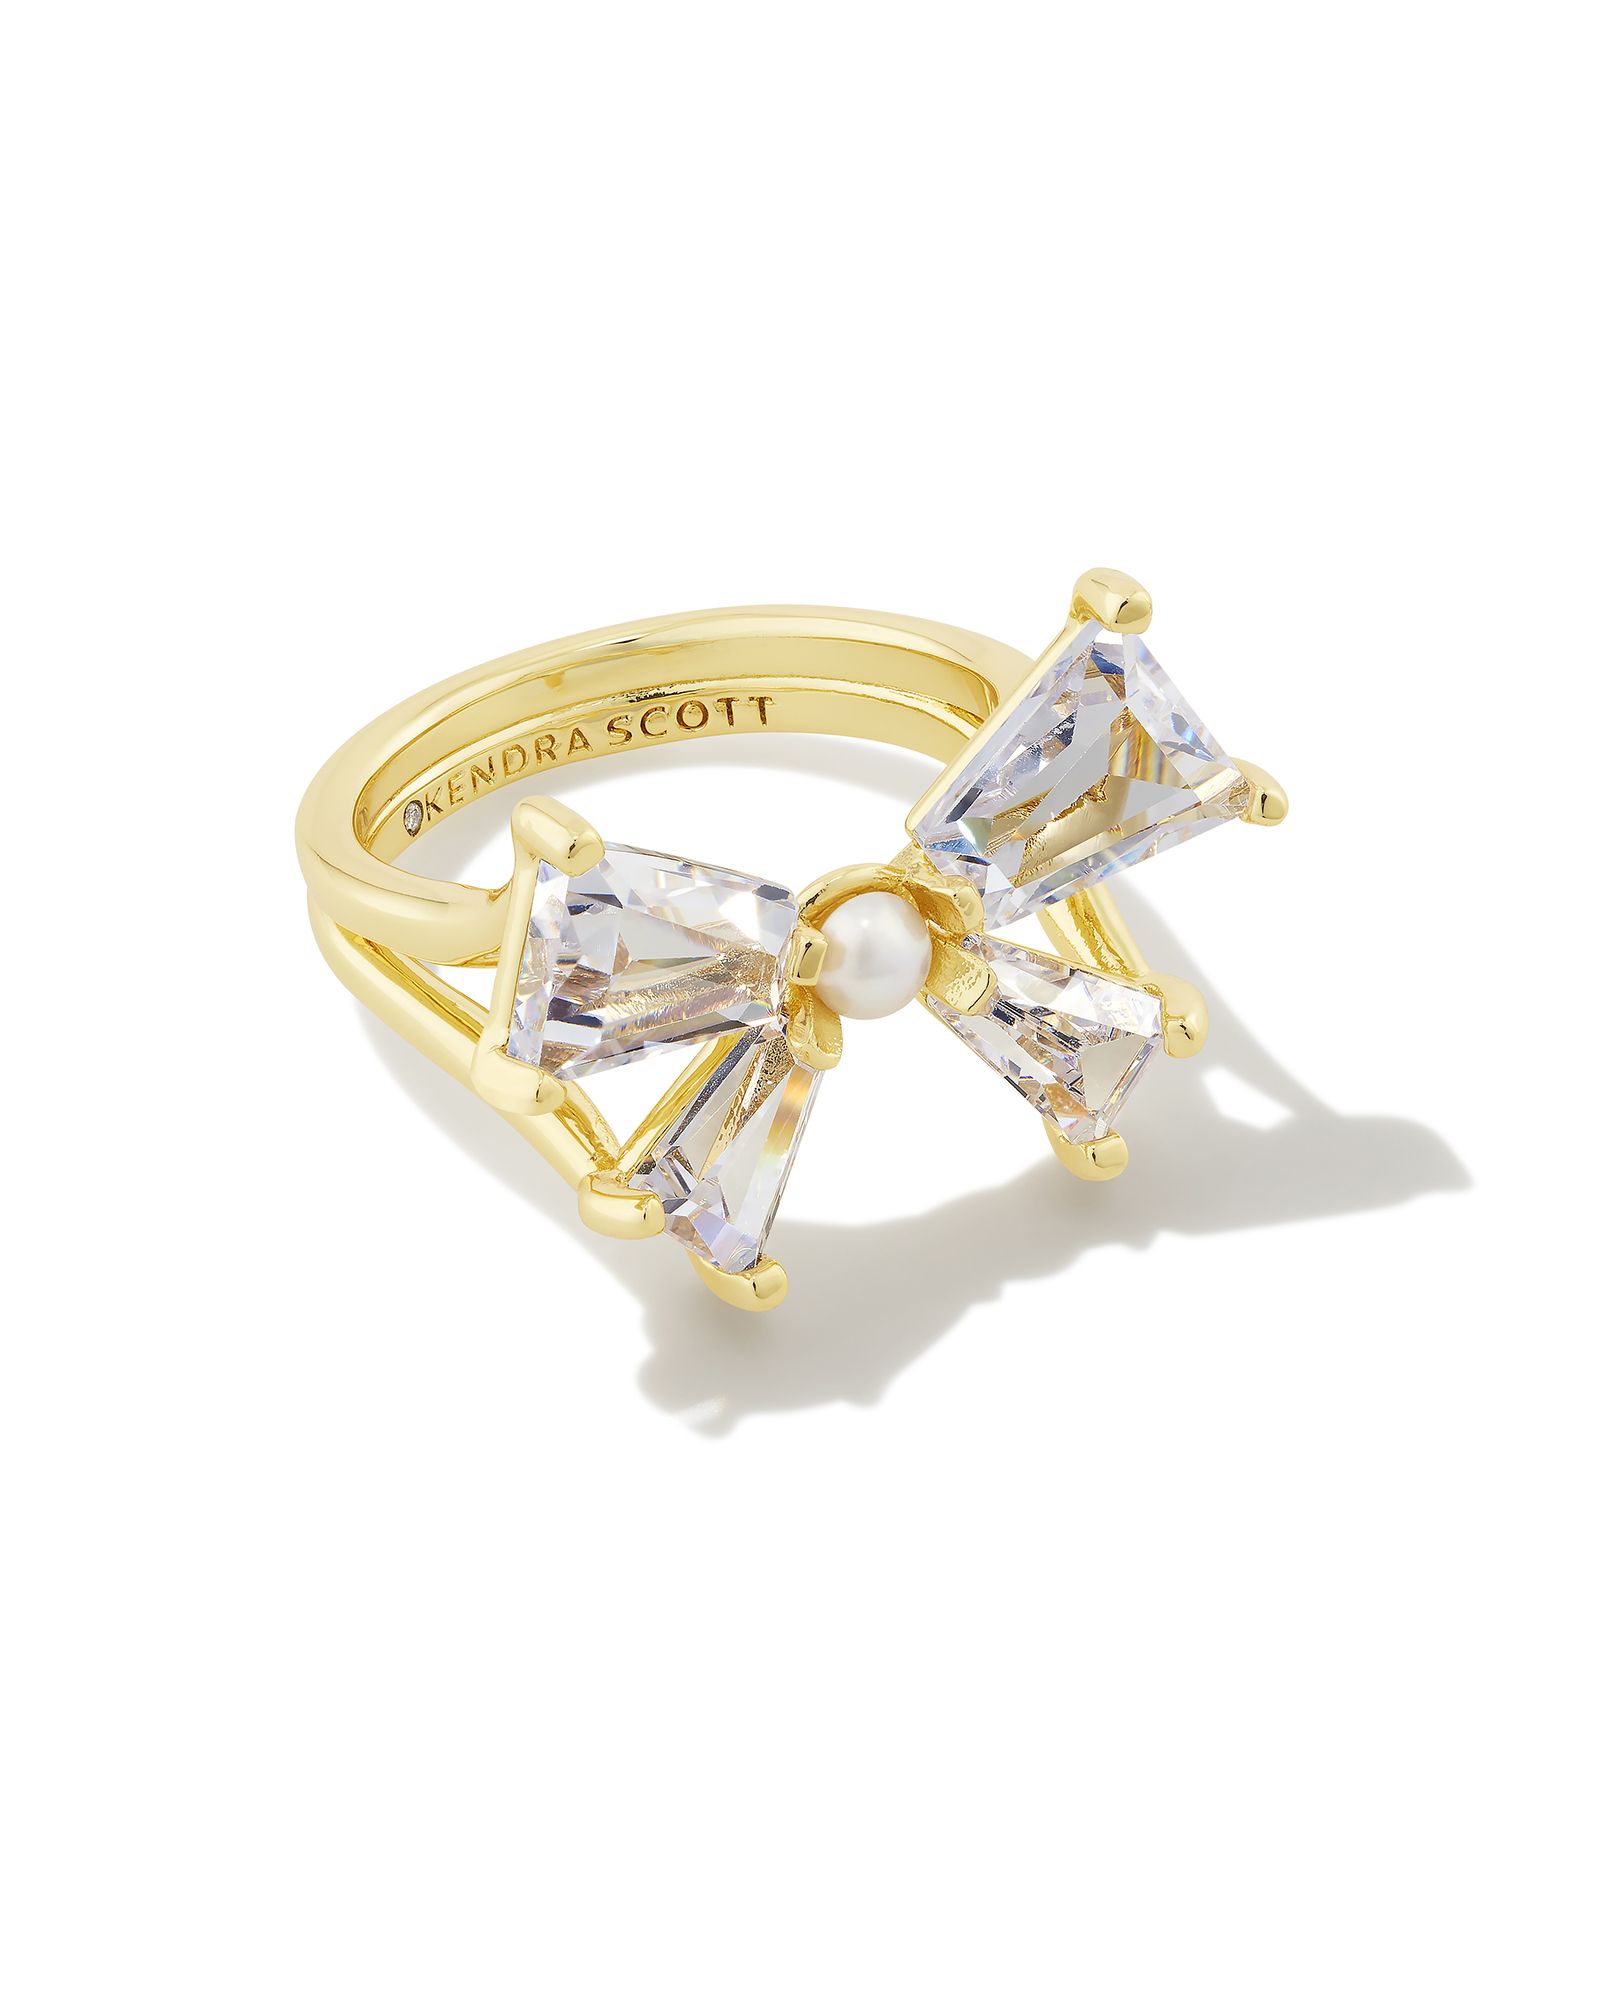 Blair Gold Bow Cocktail Ring in White Crystal | Kendra Scott